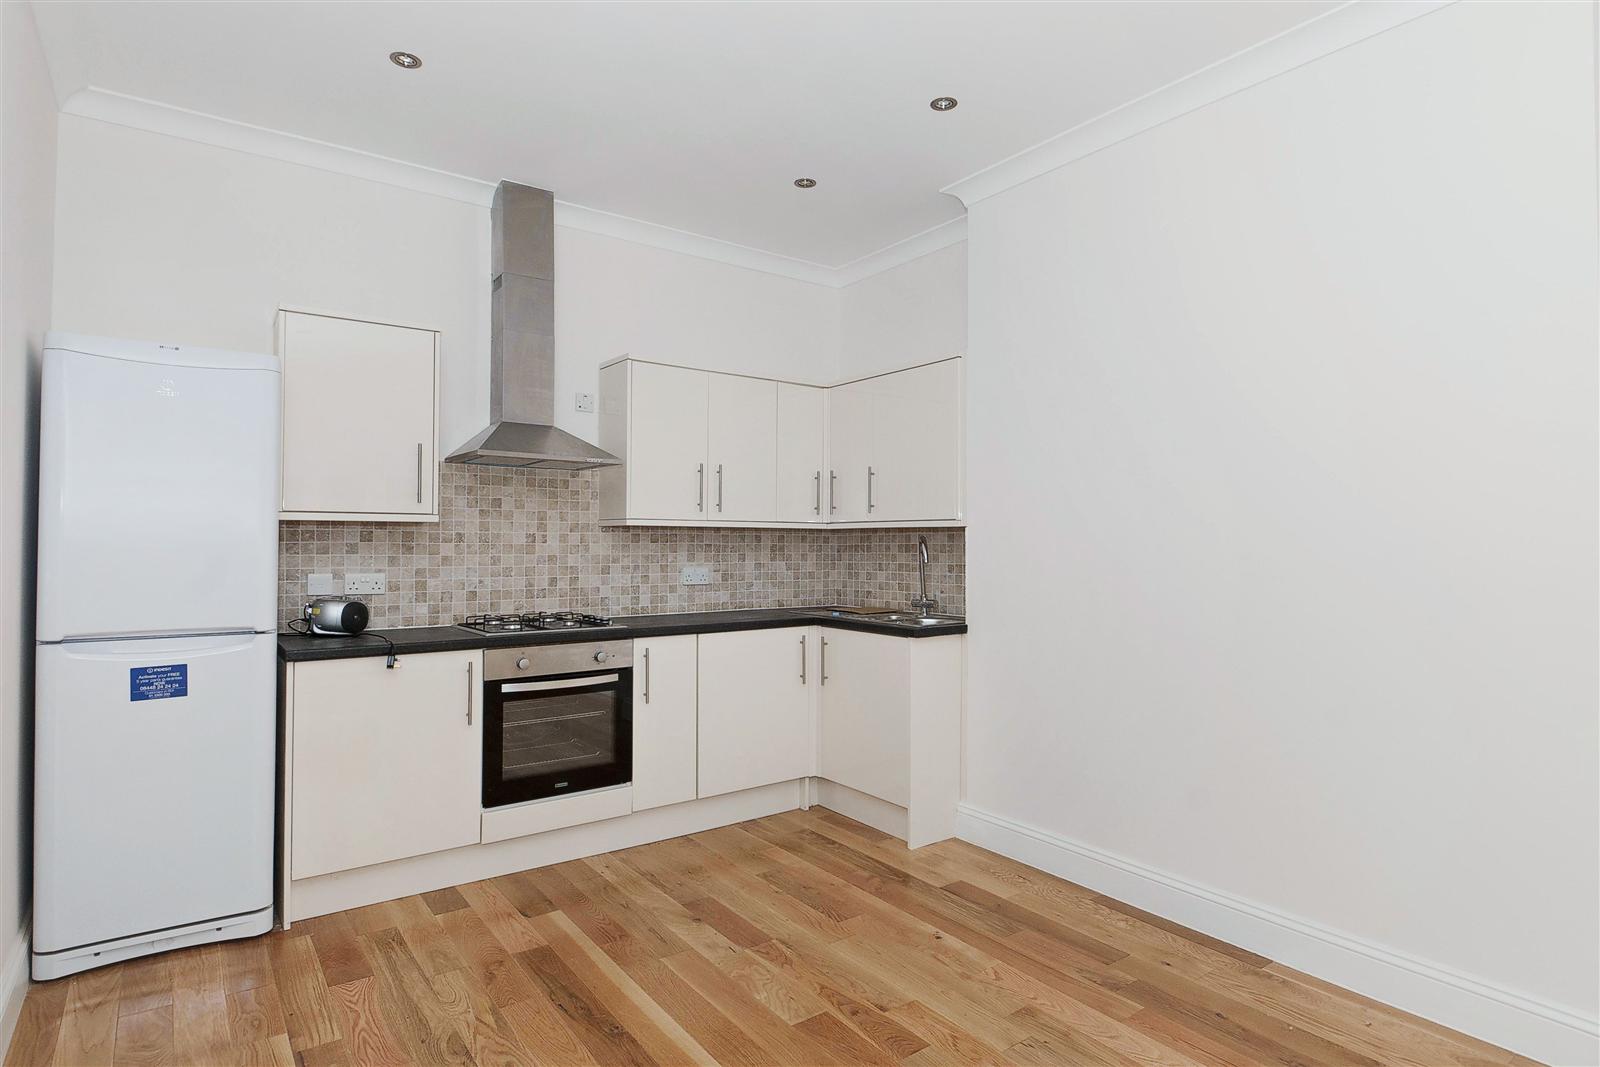 1 bed flat to rent in Anson Road - Property Image 1